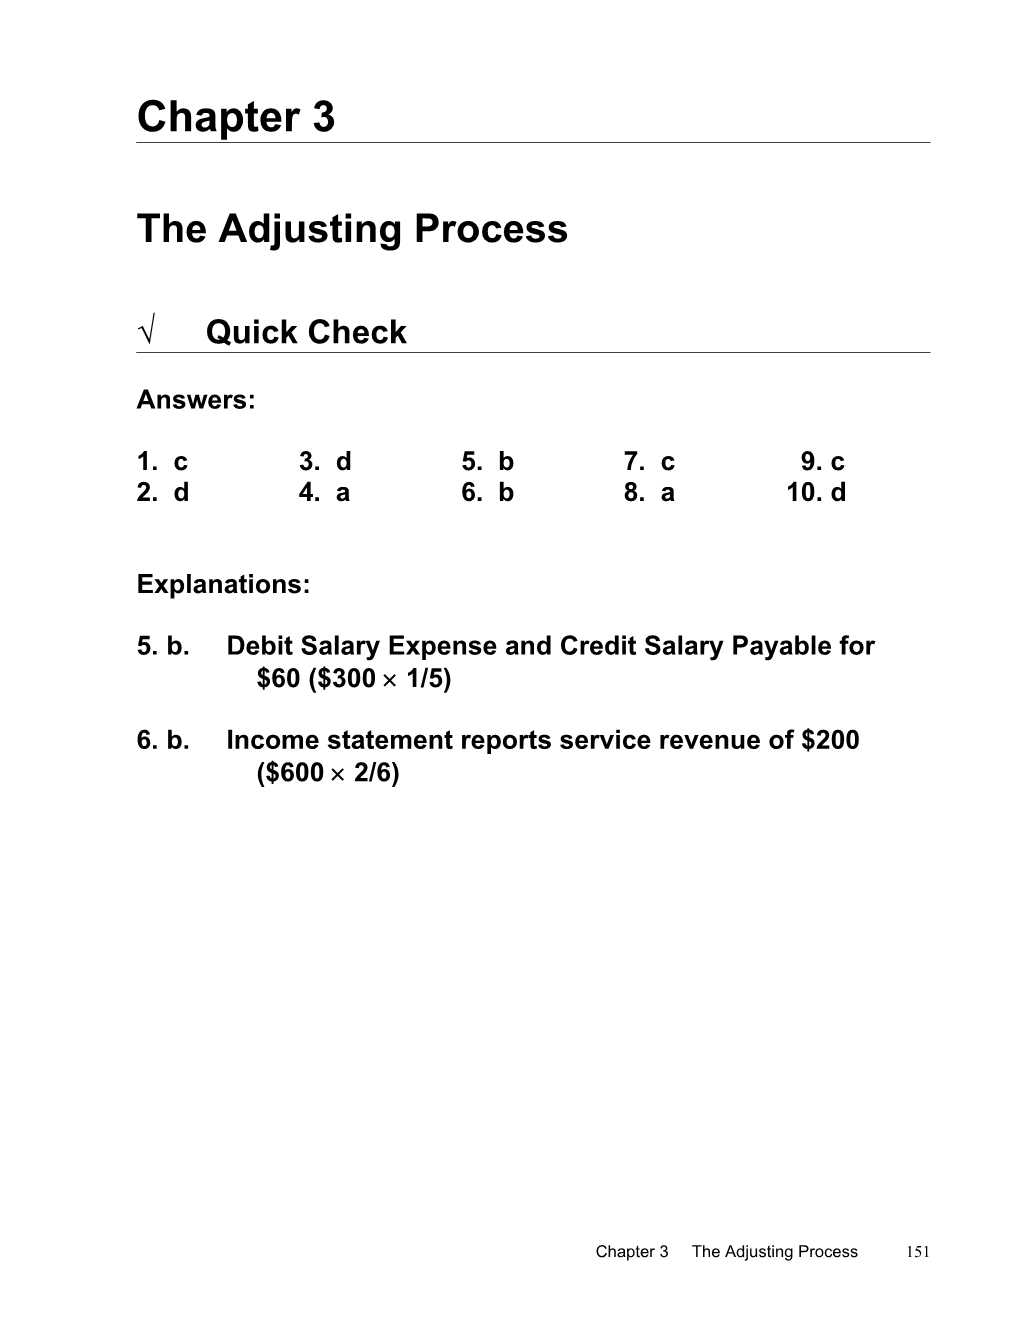 5.B.Debit Salary Expense and Credit Salary Payable For